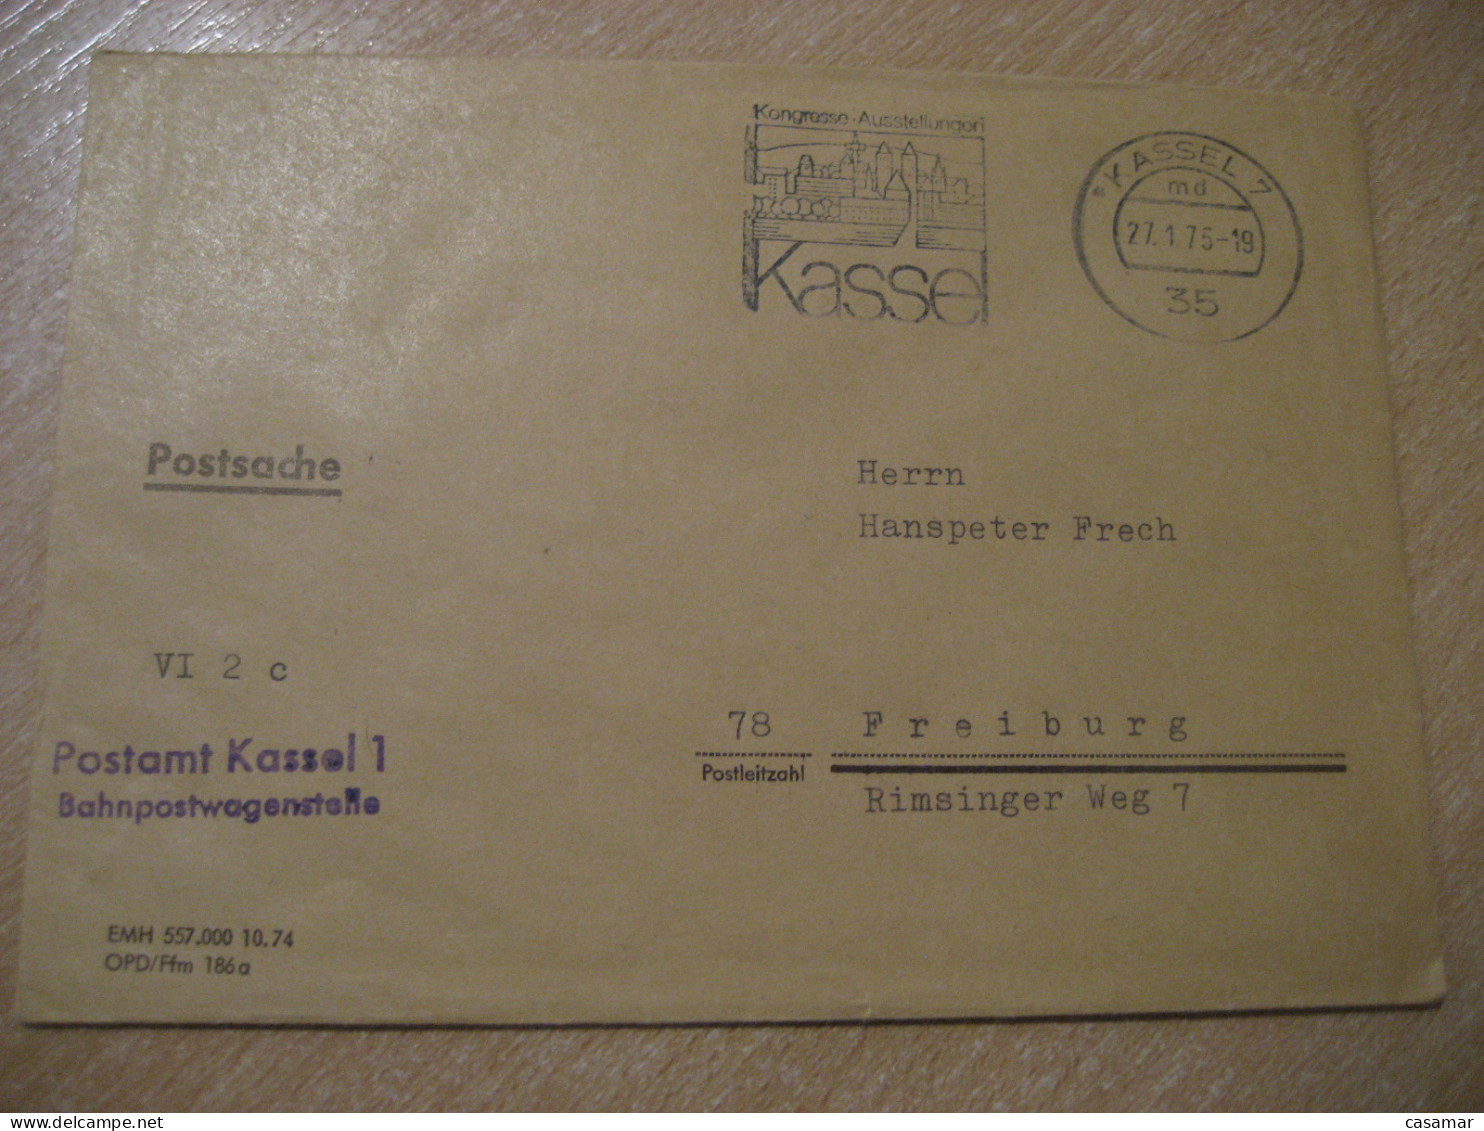 KASSEL 1975 Kongresse Ausstellungen To Freiburg Postage Paid Cancel Cover GERMANY - Covers & Documents